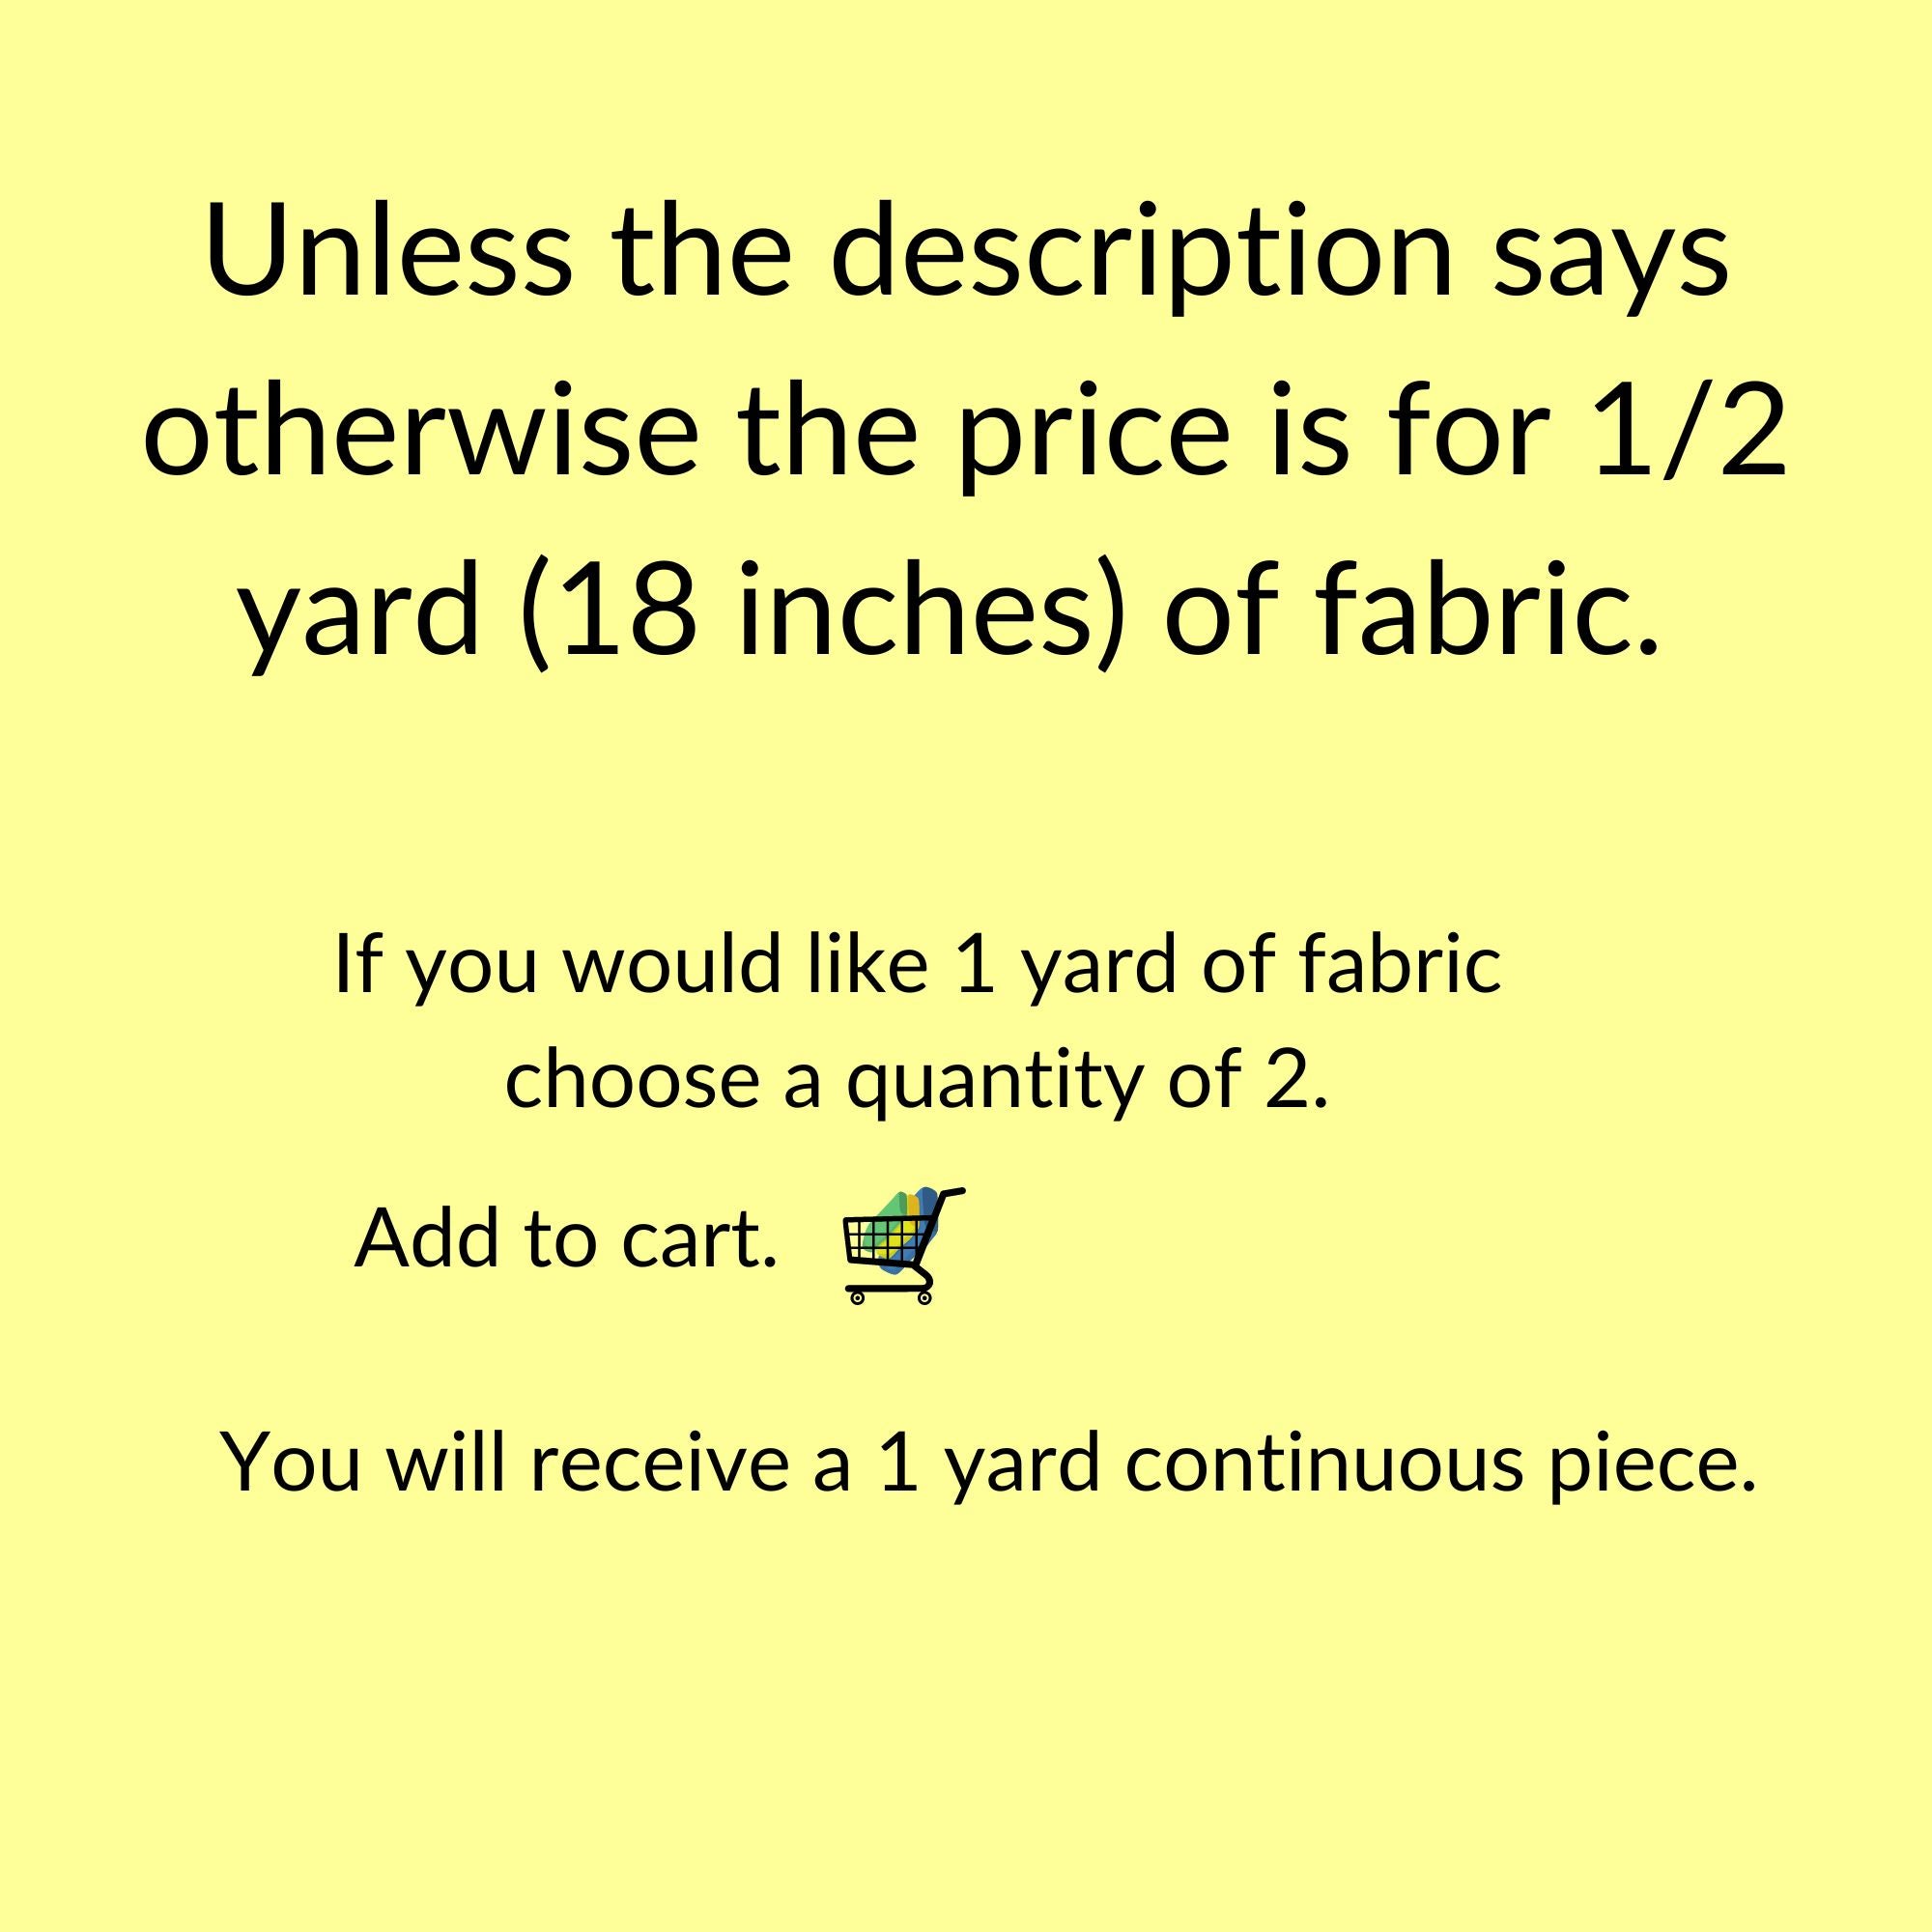 Unless the description says otherwise the price is for 1/2 yard.